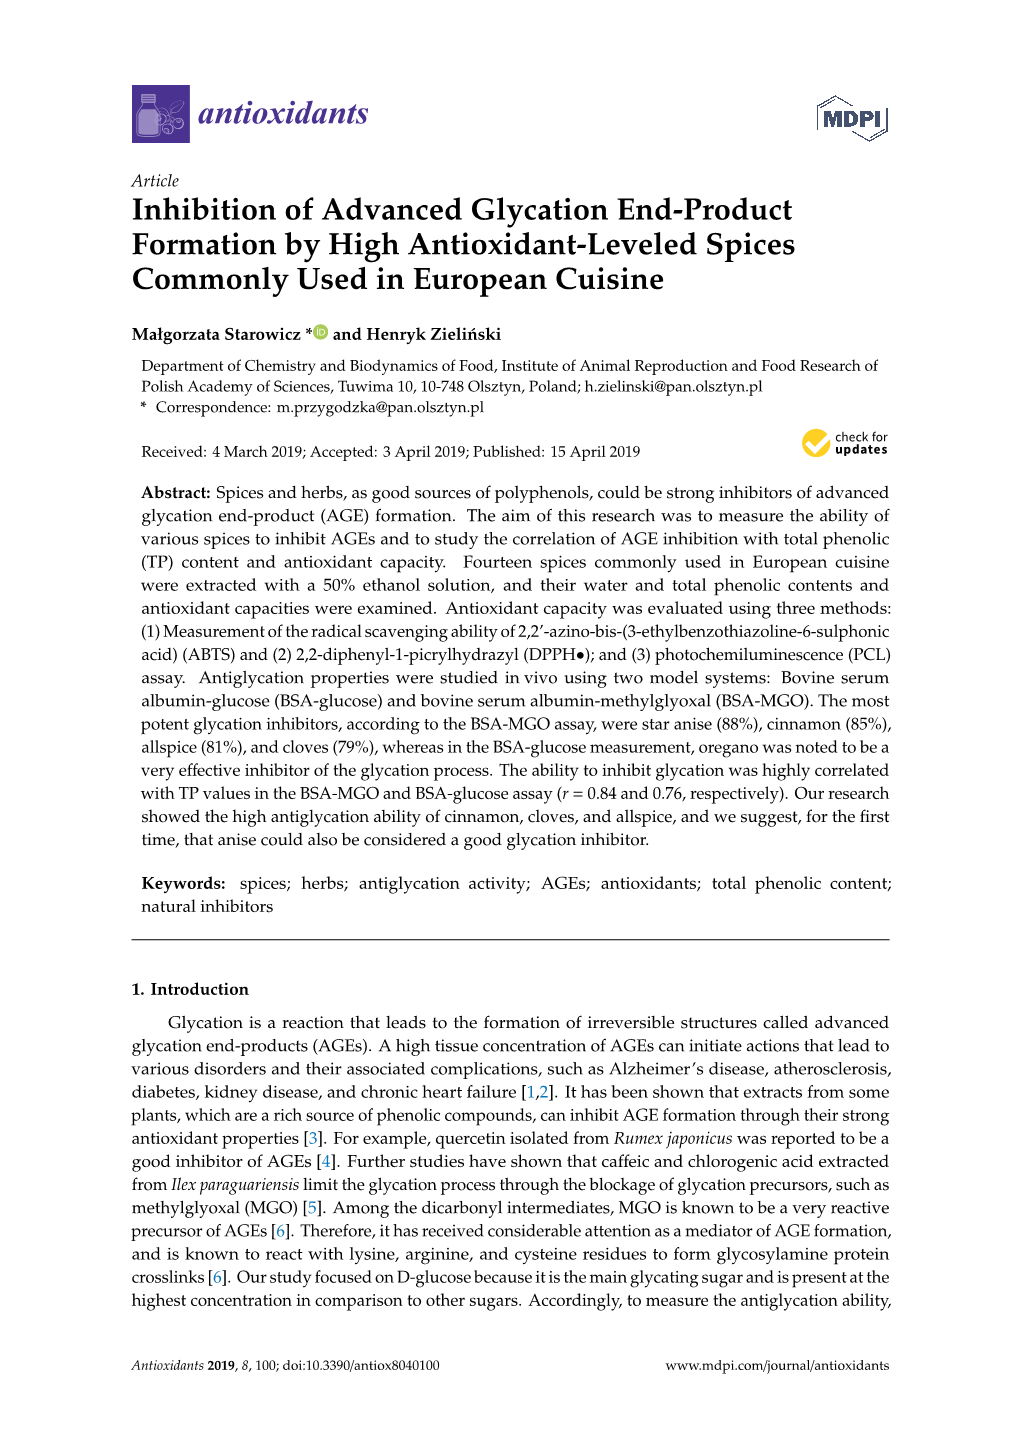 Inhibition of Advanced Glycation End-Product Formation by High Antioxidant-Leveled Spices Commonly Used in European Cuisine